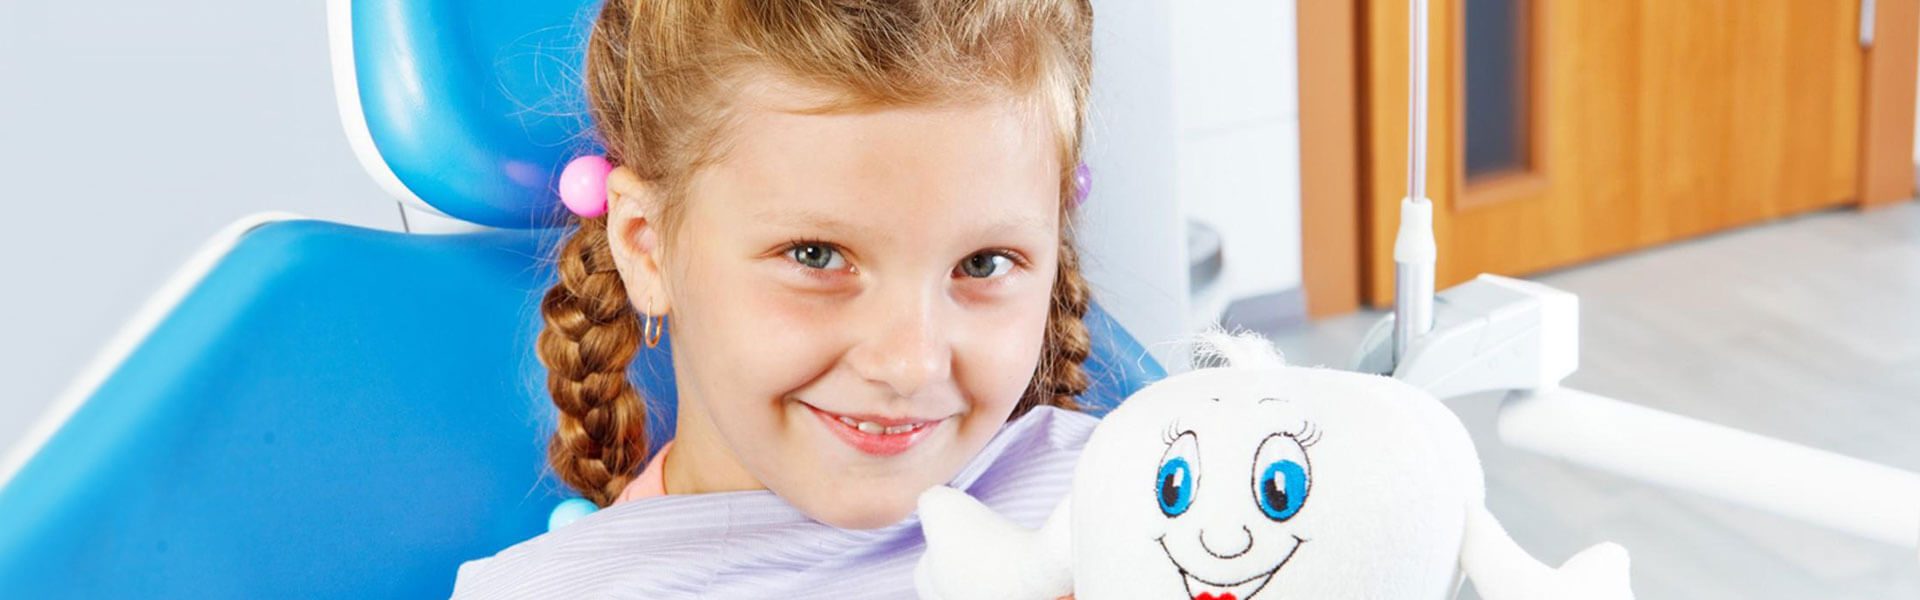 Why You Should Visit a Children’s Dentist for a Second Opinion